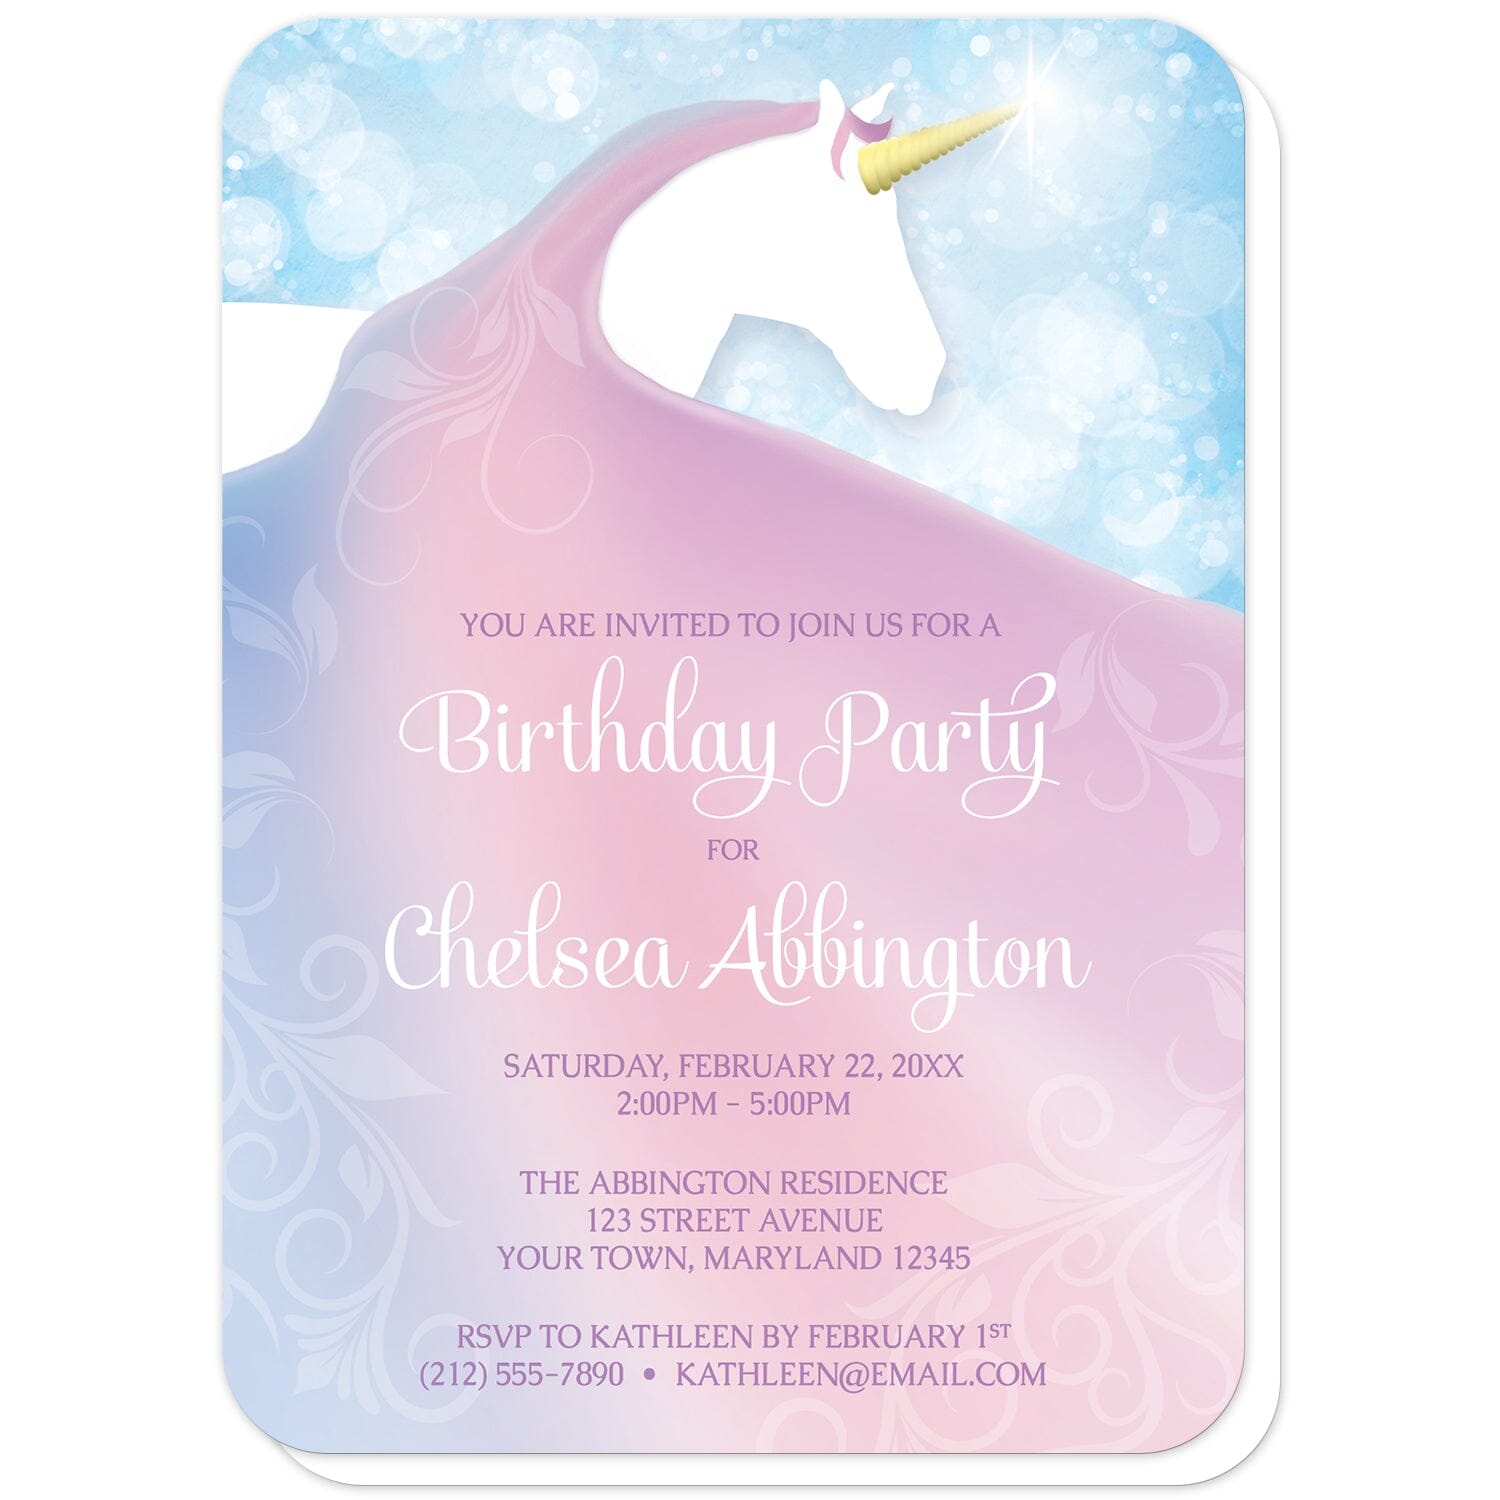 Magical Fairy-tale Unicorn Birthday Party Invitations (with rounded corners) at Artistically Invited. Uniquely illustrated magical fairy-tale unicorn birthday party invitations with a white silhouette unicorn with a golden horn and a long flowing mane in a pink, blue, and purple gradient design. The personalized information you provide for your birthday party details will be custom printed in white and light purple over the colorful unicorn mane. Behind the unicorn is a magical blue bokeh background design.